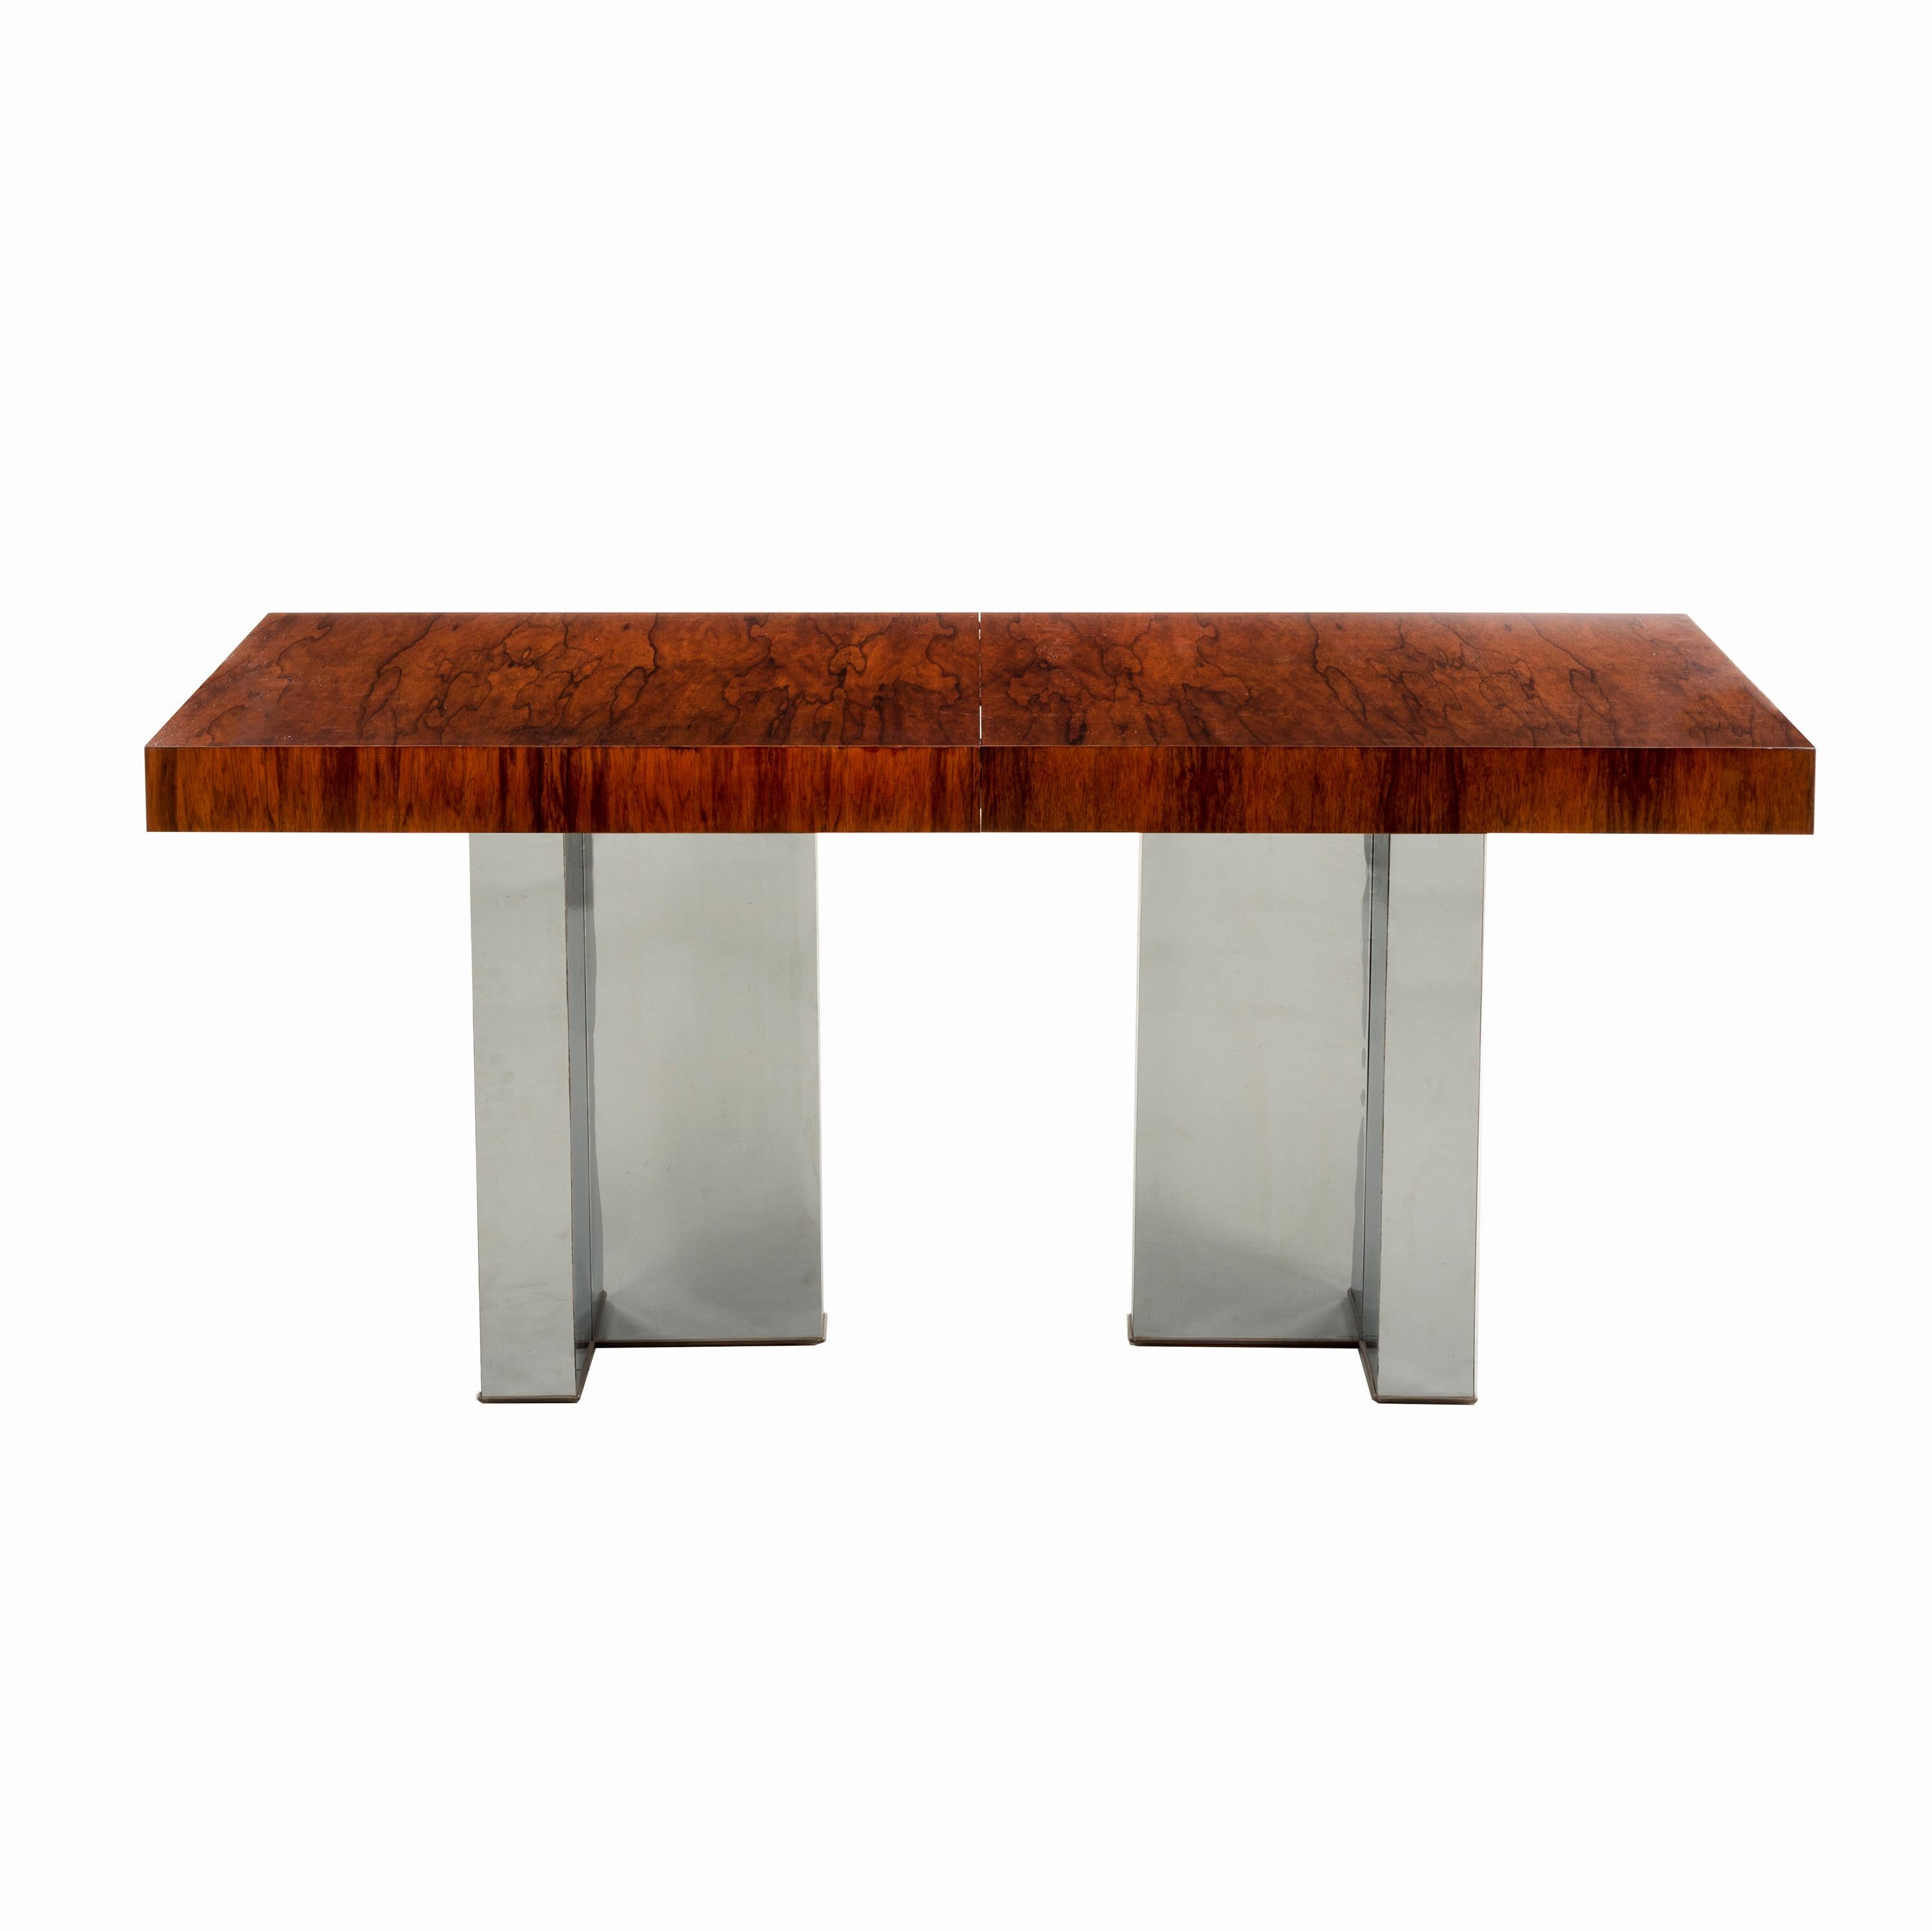 Milo Baughman for Thayer Coggin; exotic bookmatched cathedral patterned rosewood top with T- patterned chrome legs. Two leaves the table extends to 98